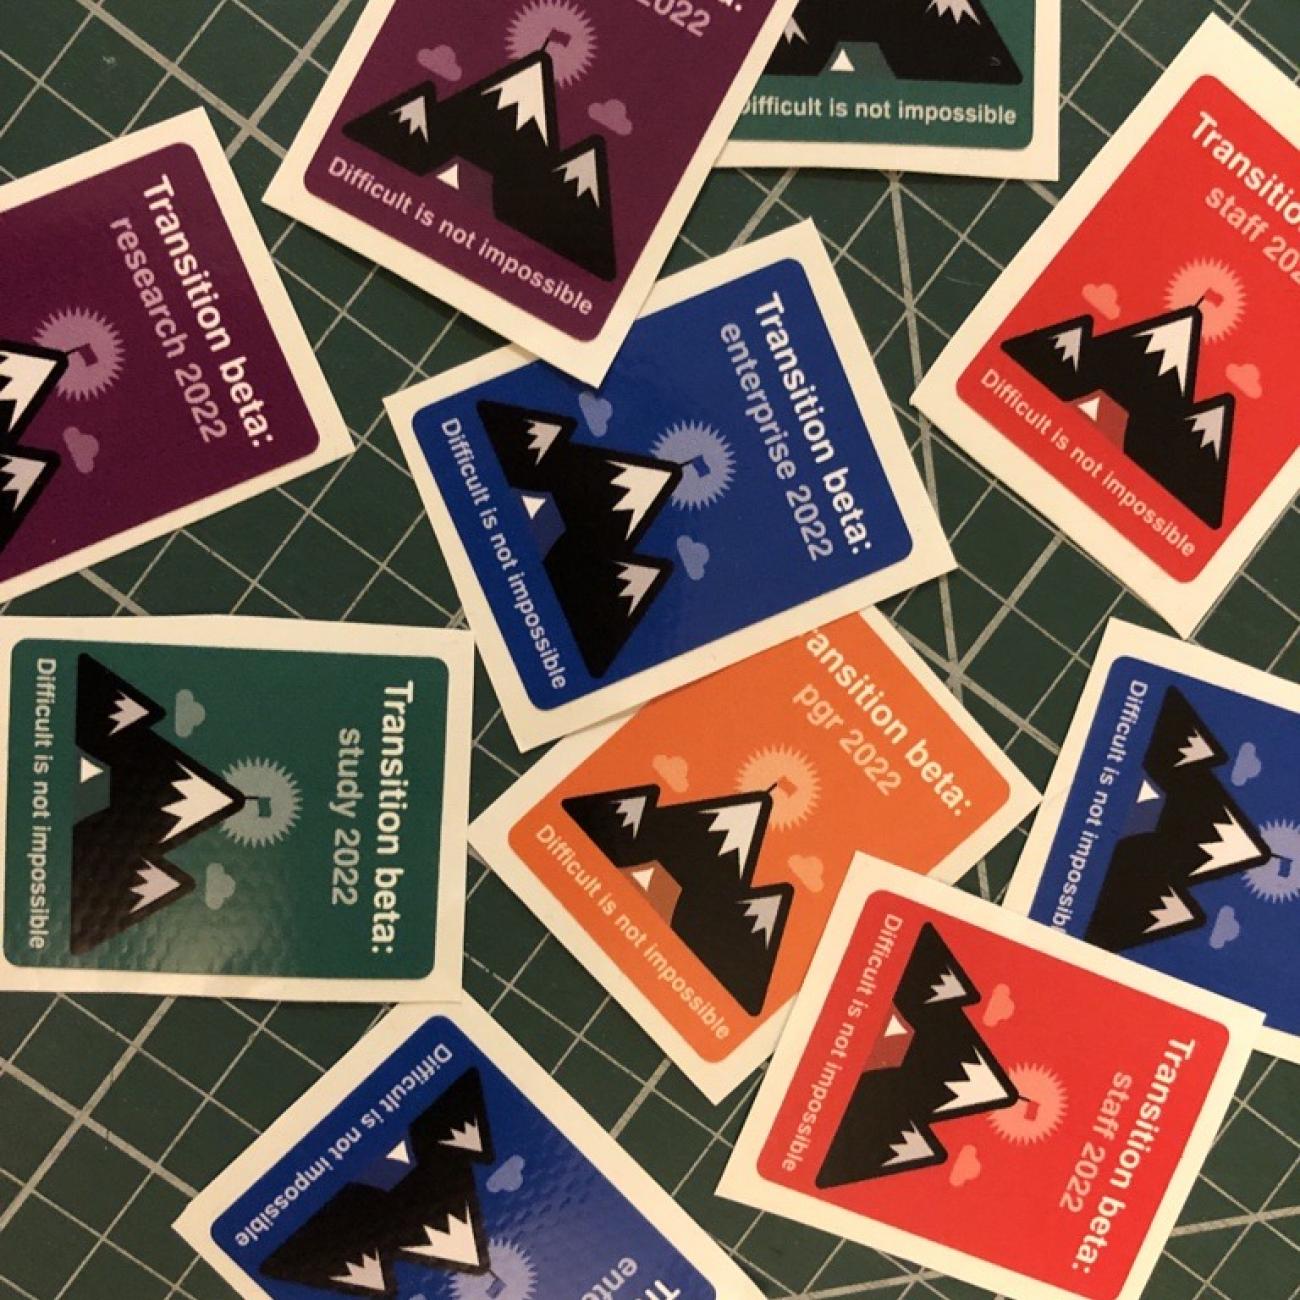 Our beta stickers featuring three mountain peaks with a basecamp below, just like OneWeb allowed us to achieve so far.